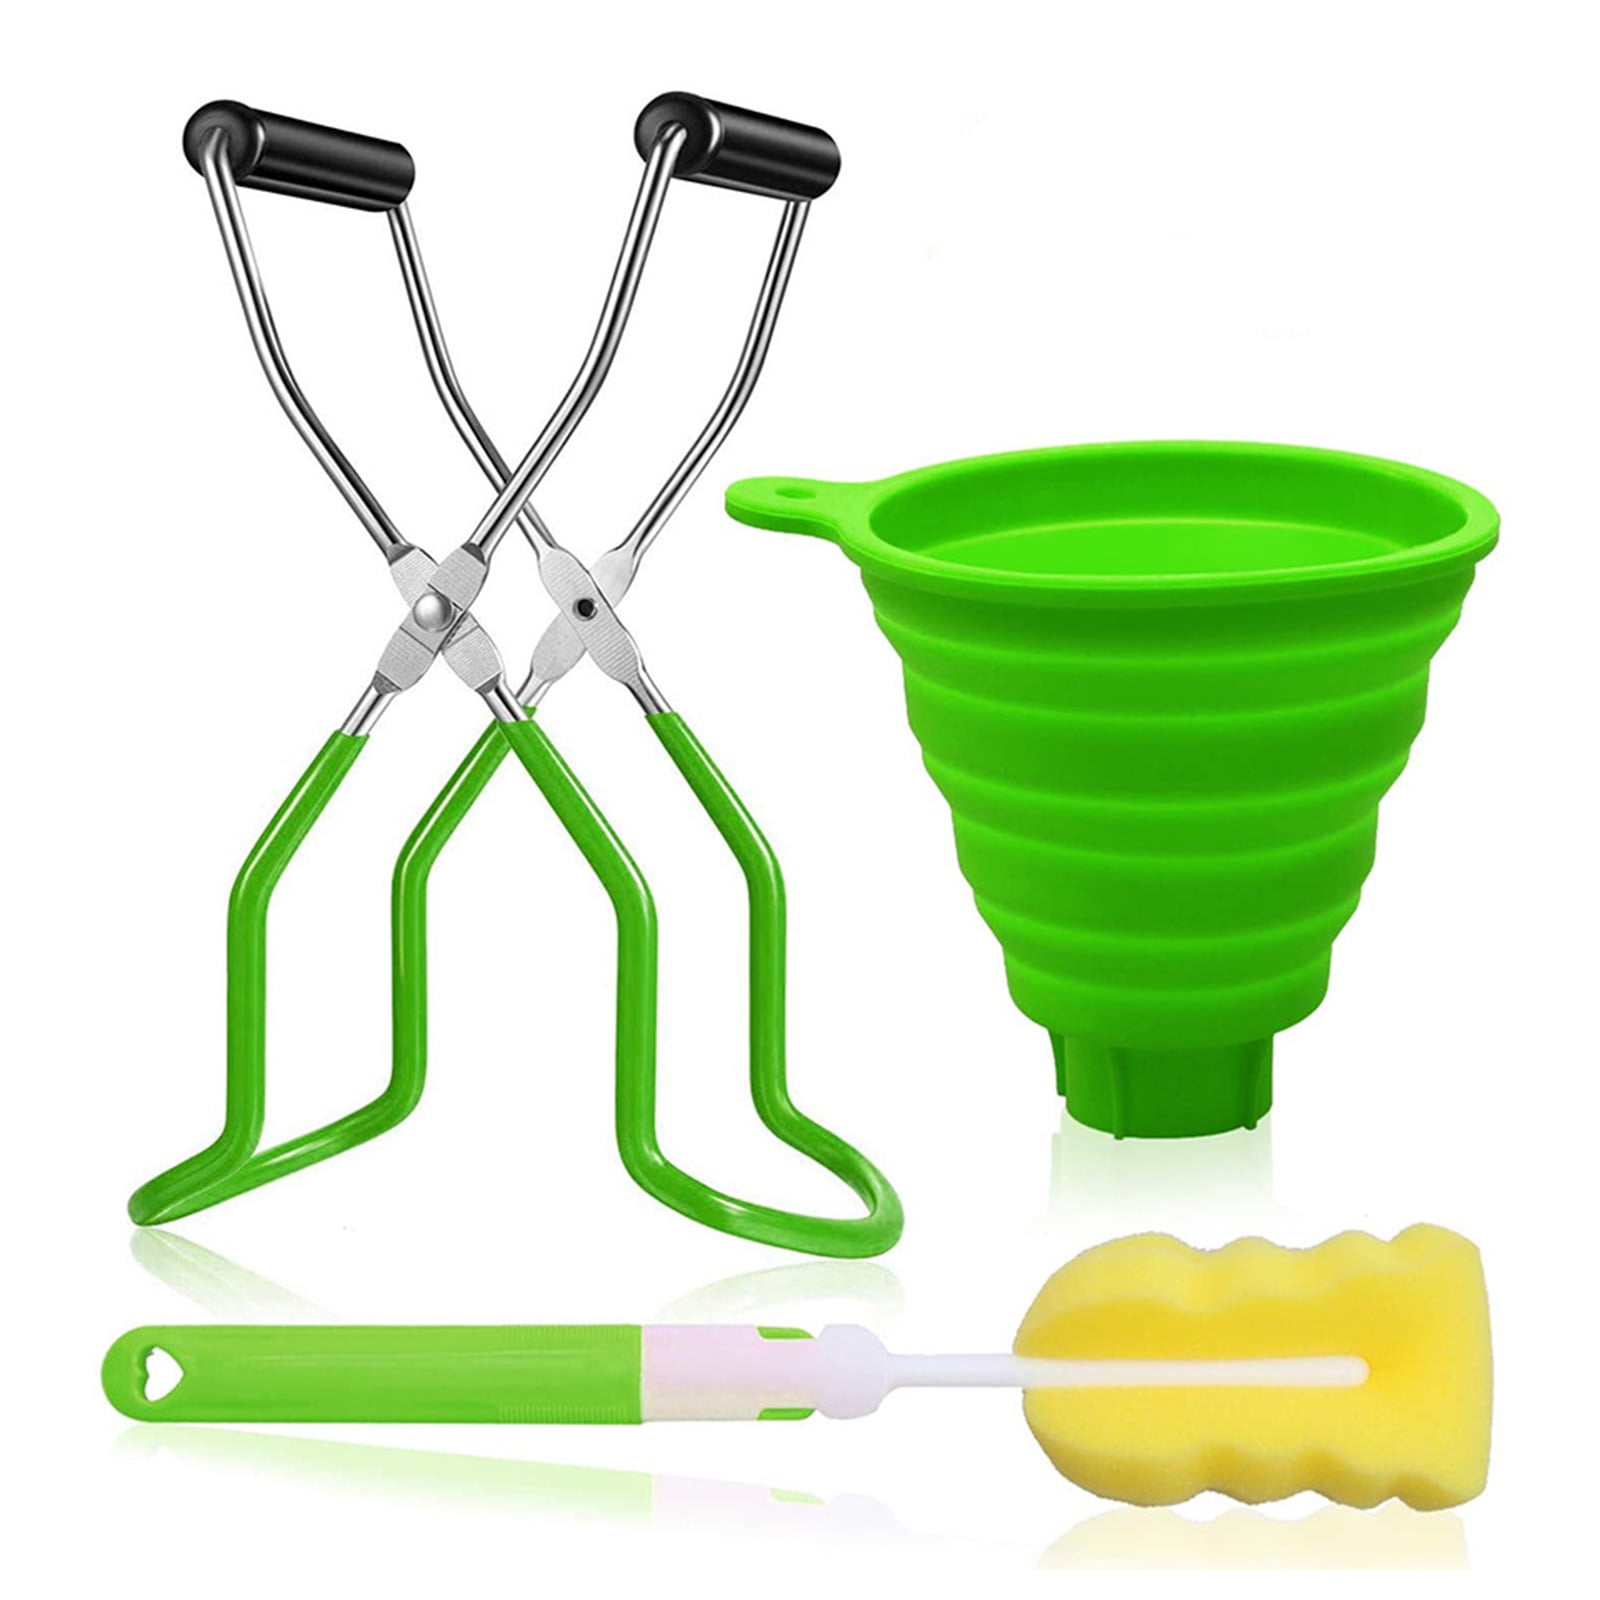 for Home Canning Accessories Kit Green Foldable Canning Jar Lifter with Rubber Grips and 1 Pcs Wide Silicone Collapsible Canning Funnel 2 Pcs Canning Kits 